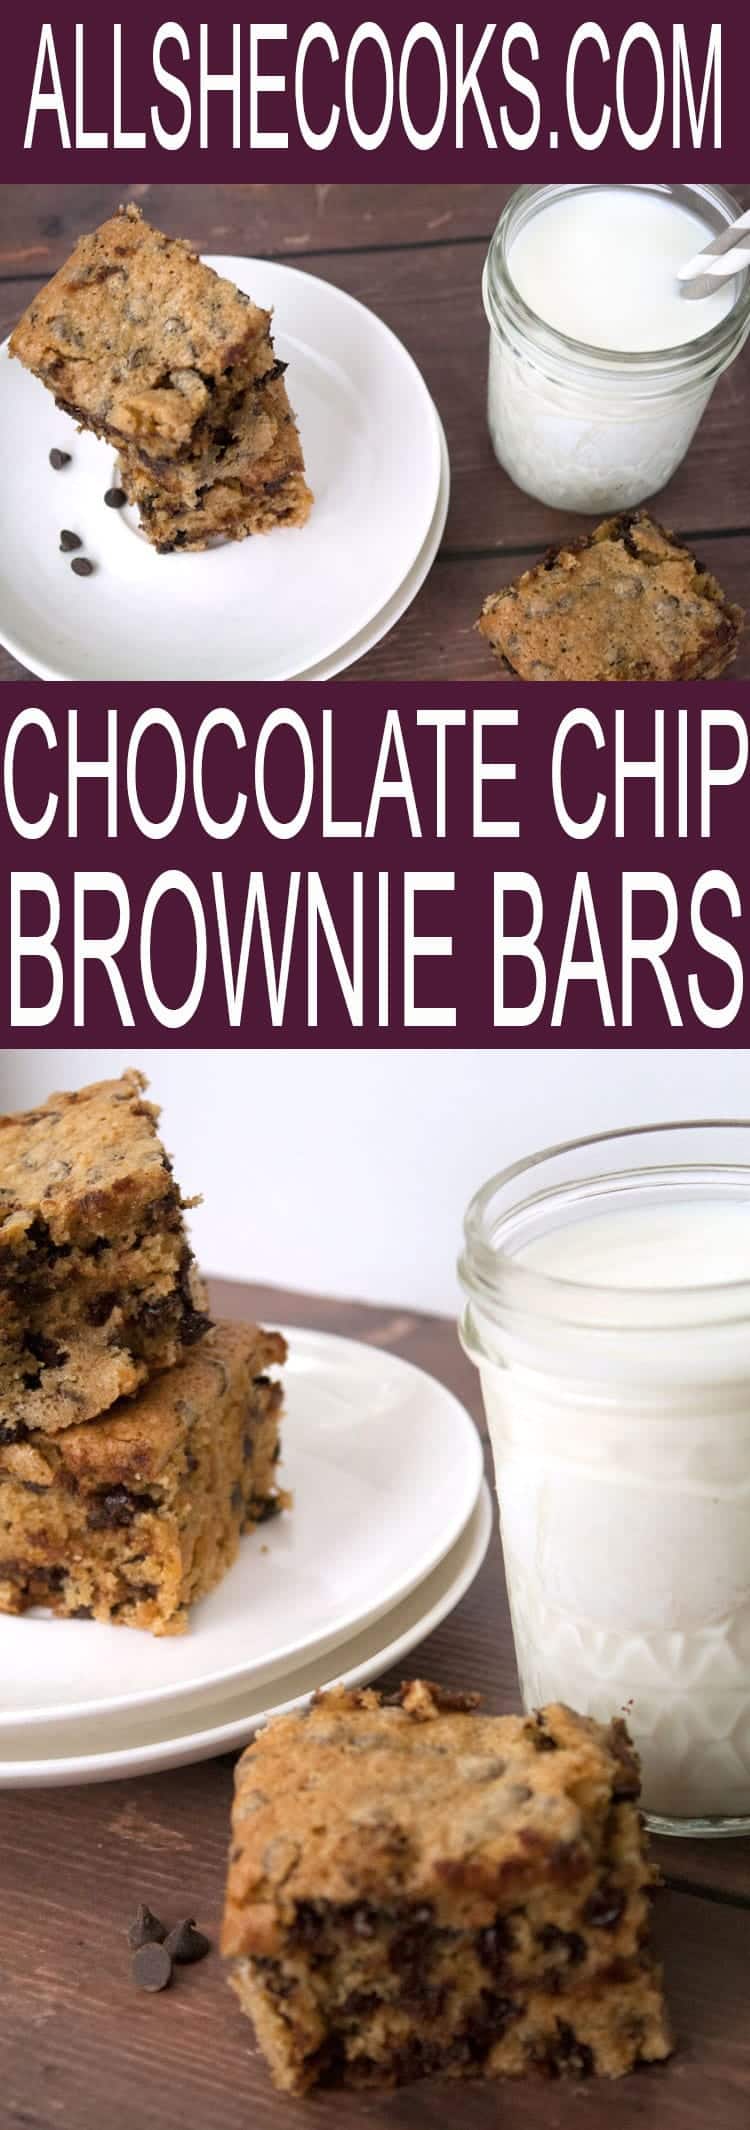 Try this chocolate chip cookie bars recipe. It's great on its own, with decorative frosting or even with ice cream. Easy baking recipes and kids can help.